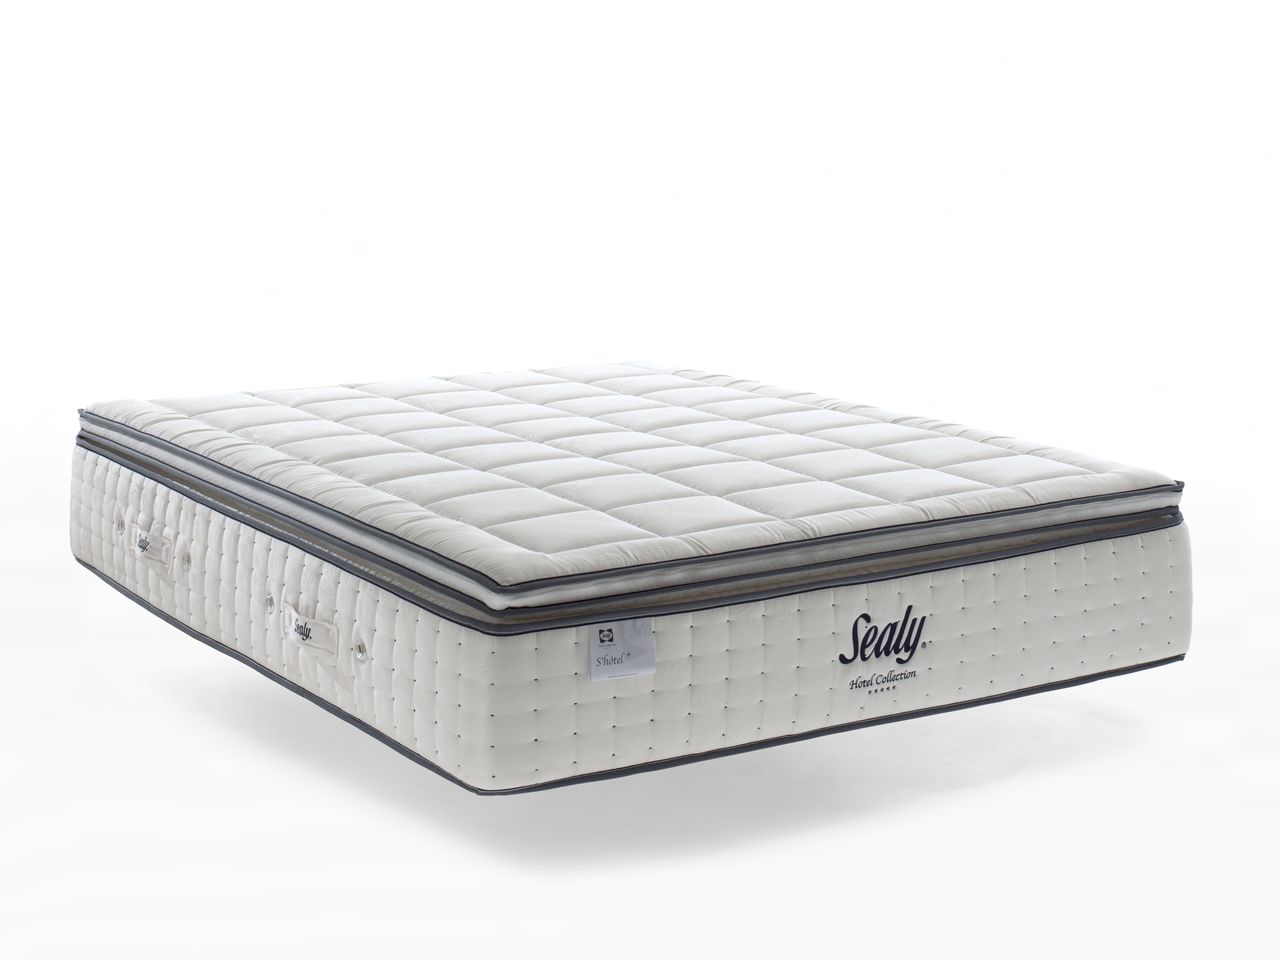 sealy hotel deluxe mattresses